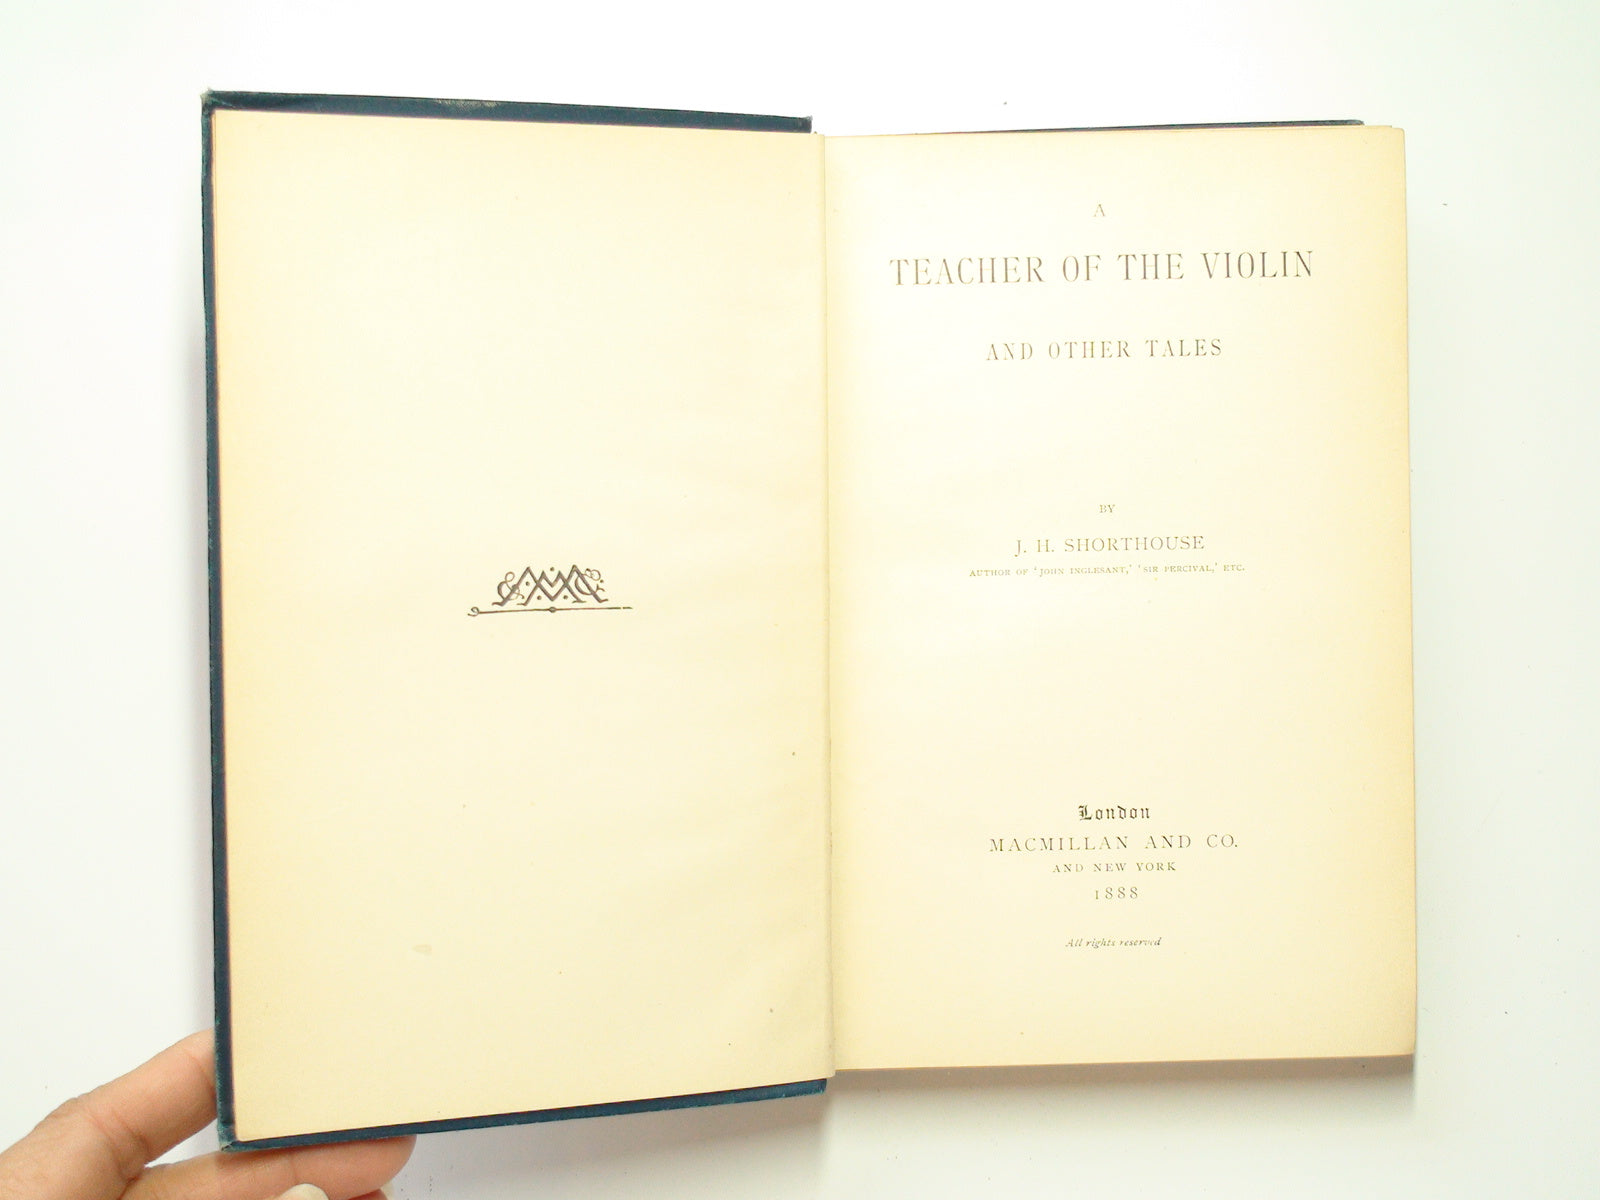 A Teacher of the Violin and Other Tales, by J. H. Shorthouse, London, 1888